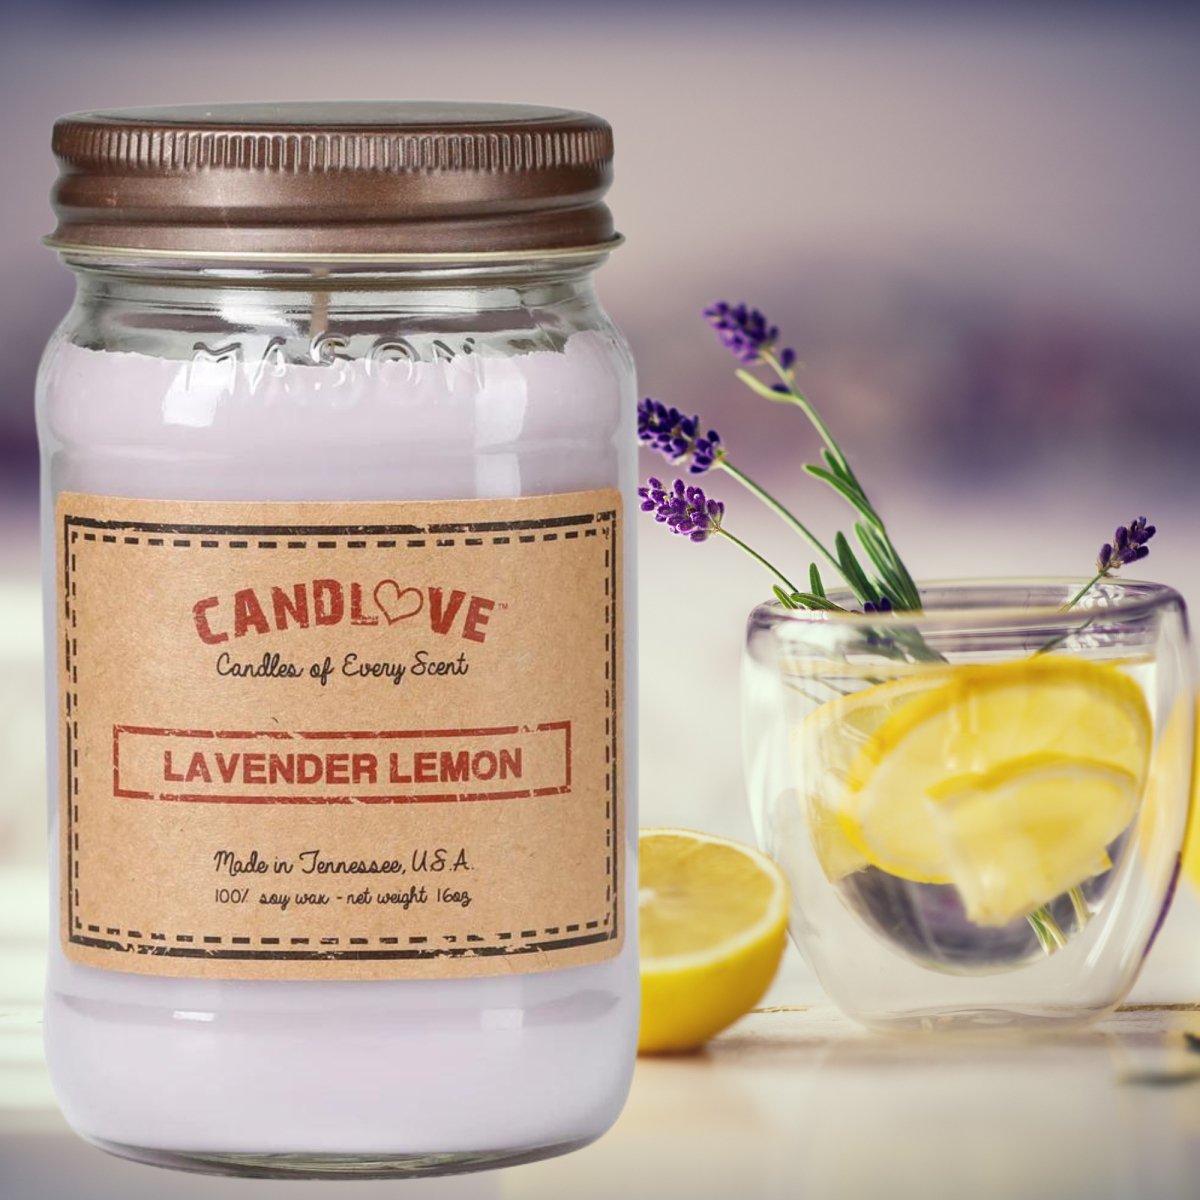 Picture of PPI SUPPLIES Lavender-L-C Candlove Lavender Lemon Scented Candle - Non-Toxic 100% Soy Candle - Handmade & Hand Poured Long Burning Candle - Highly Scented All Natural Clean Burning Candle (16 OZ Mason Jar) Made in The USA